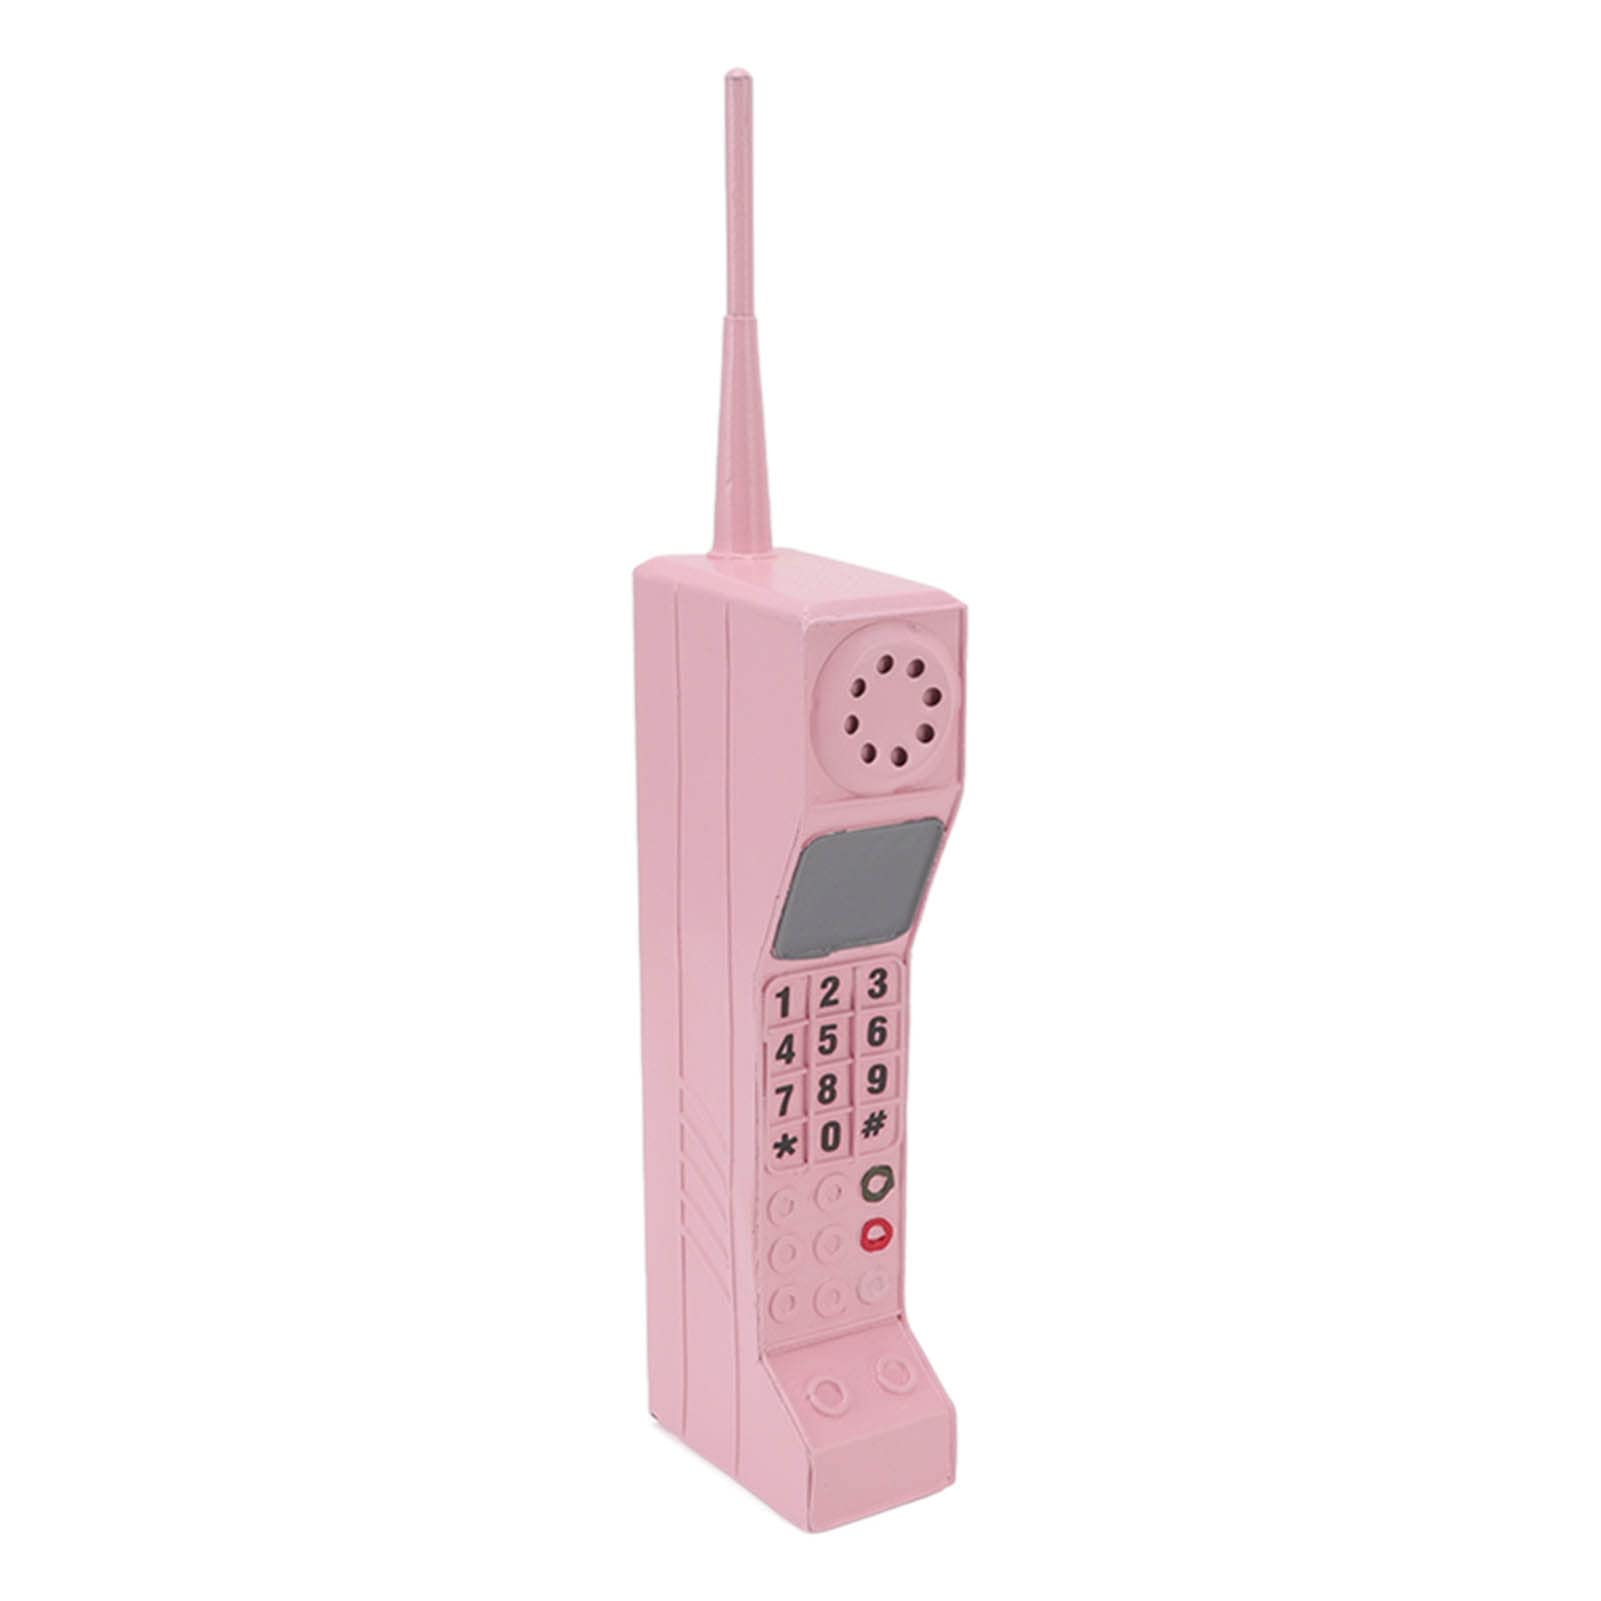 Inflatable Mobile Phone,80's Retro Mobile Phone,Retro Brick Cell Phone Ornament,for 80's 90's Party Decorations Supplies Retro Cell Dress Accessory,Inflatable Mobile Phone (Pink)